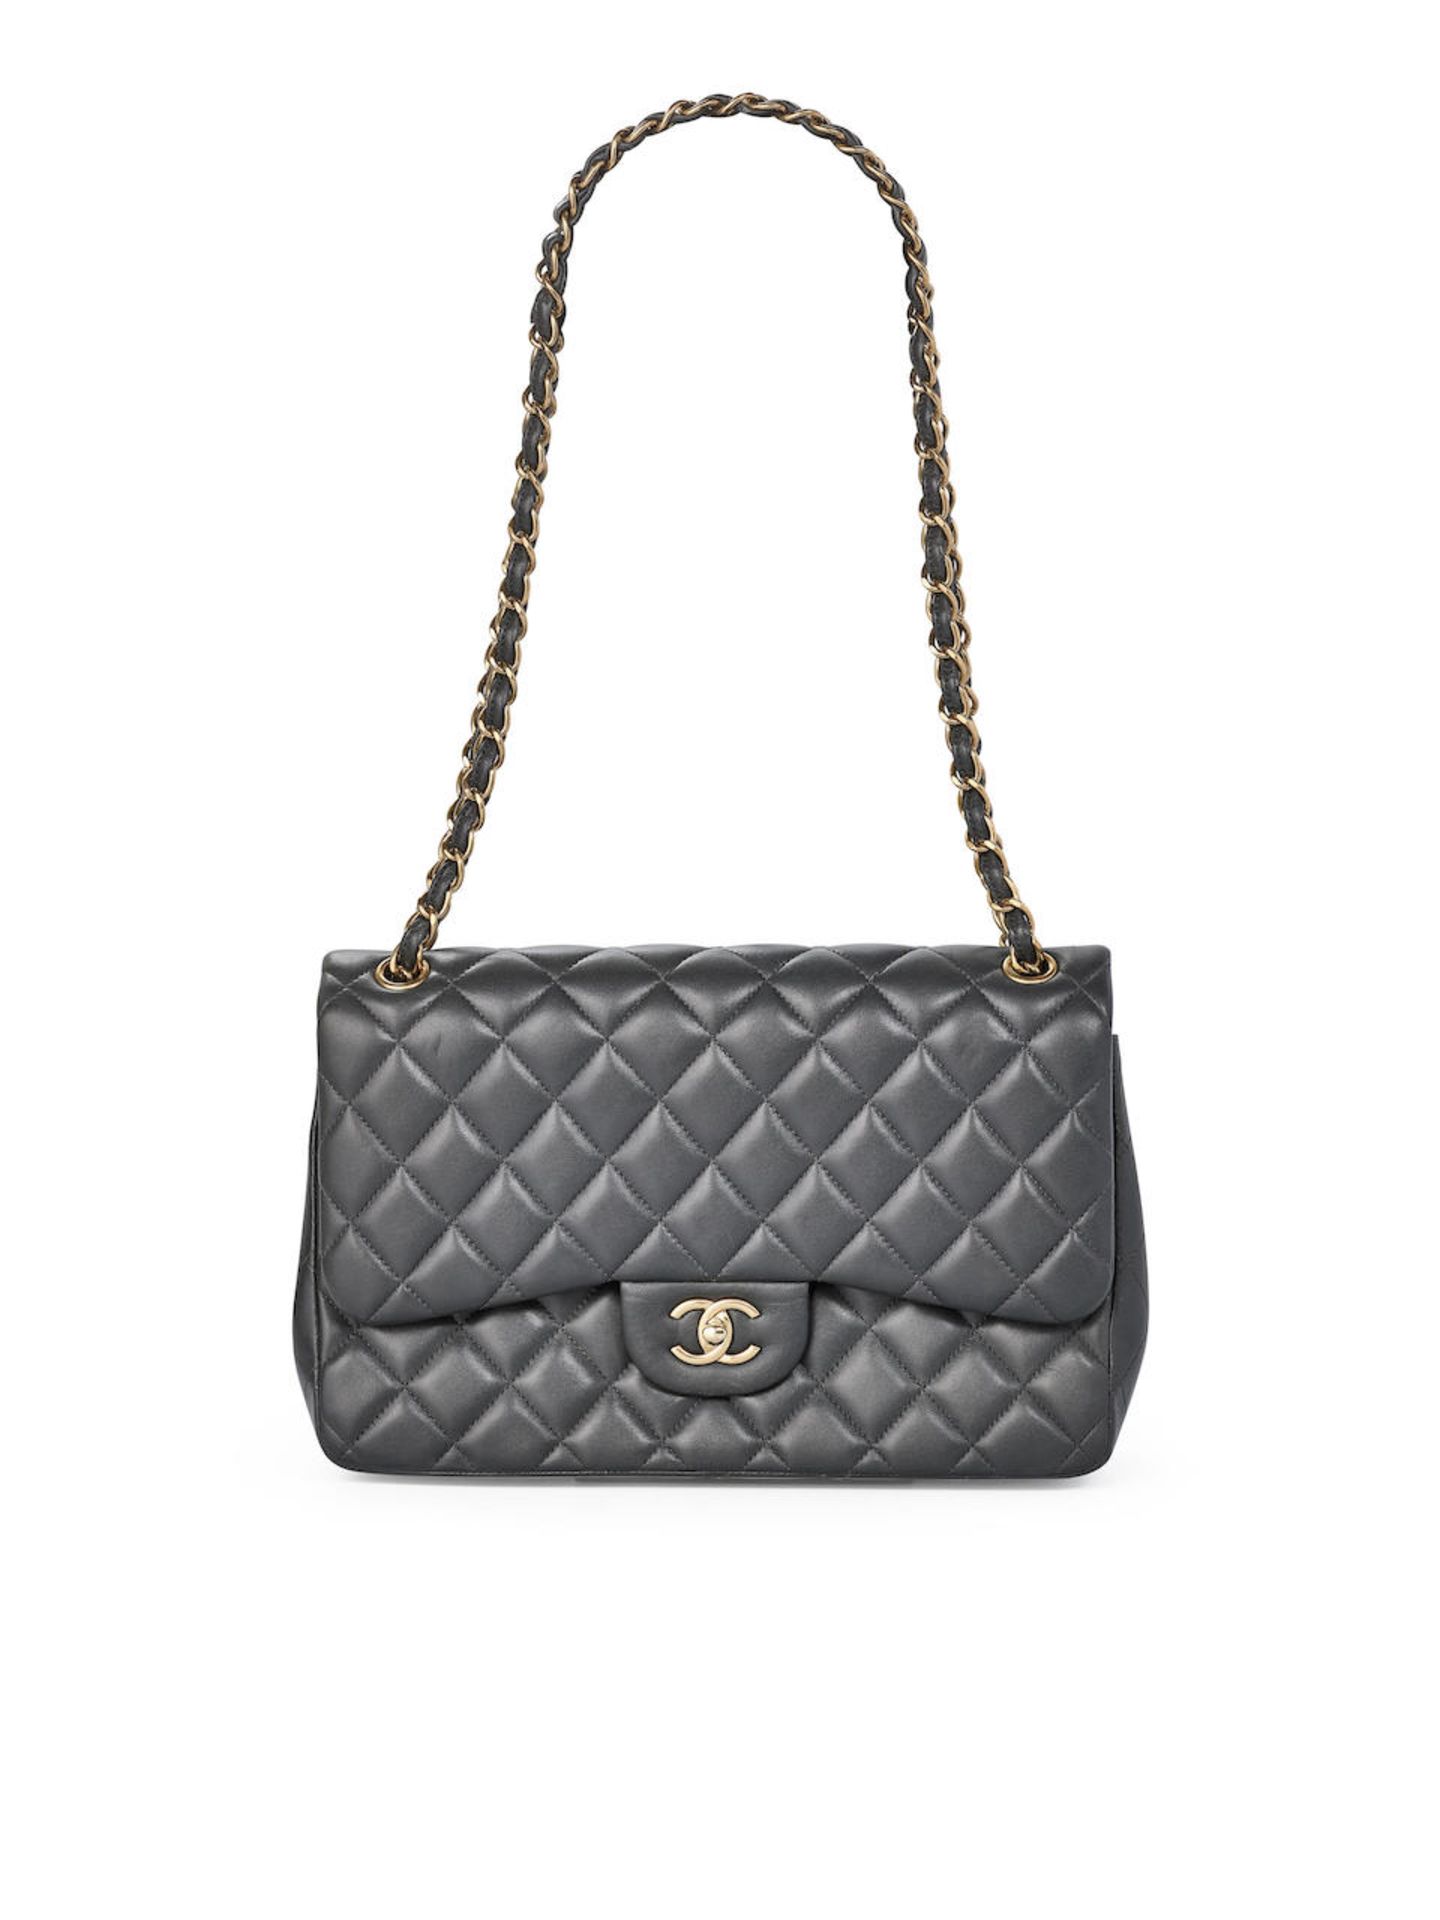 CHANEL: BLACK QUILTED LAMBSKIN JUMBO CLASSIC DOUBLE FLAP WITH GOLD TONED HARDWARE (Includes auth...